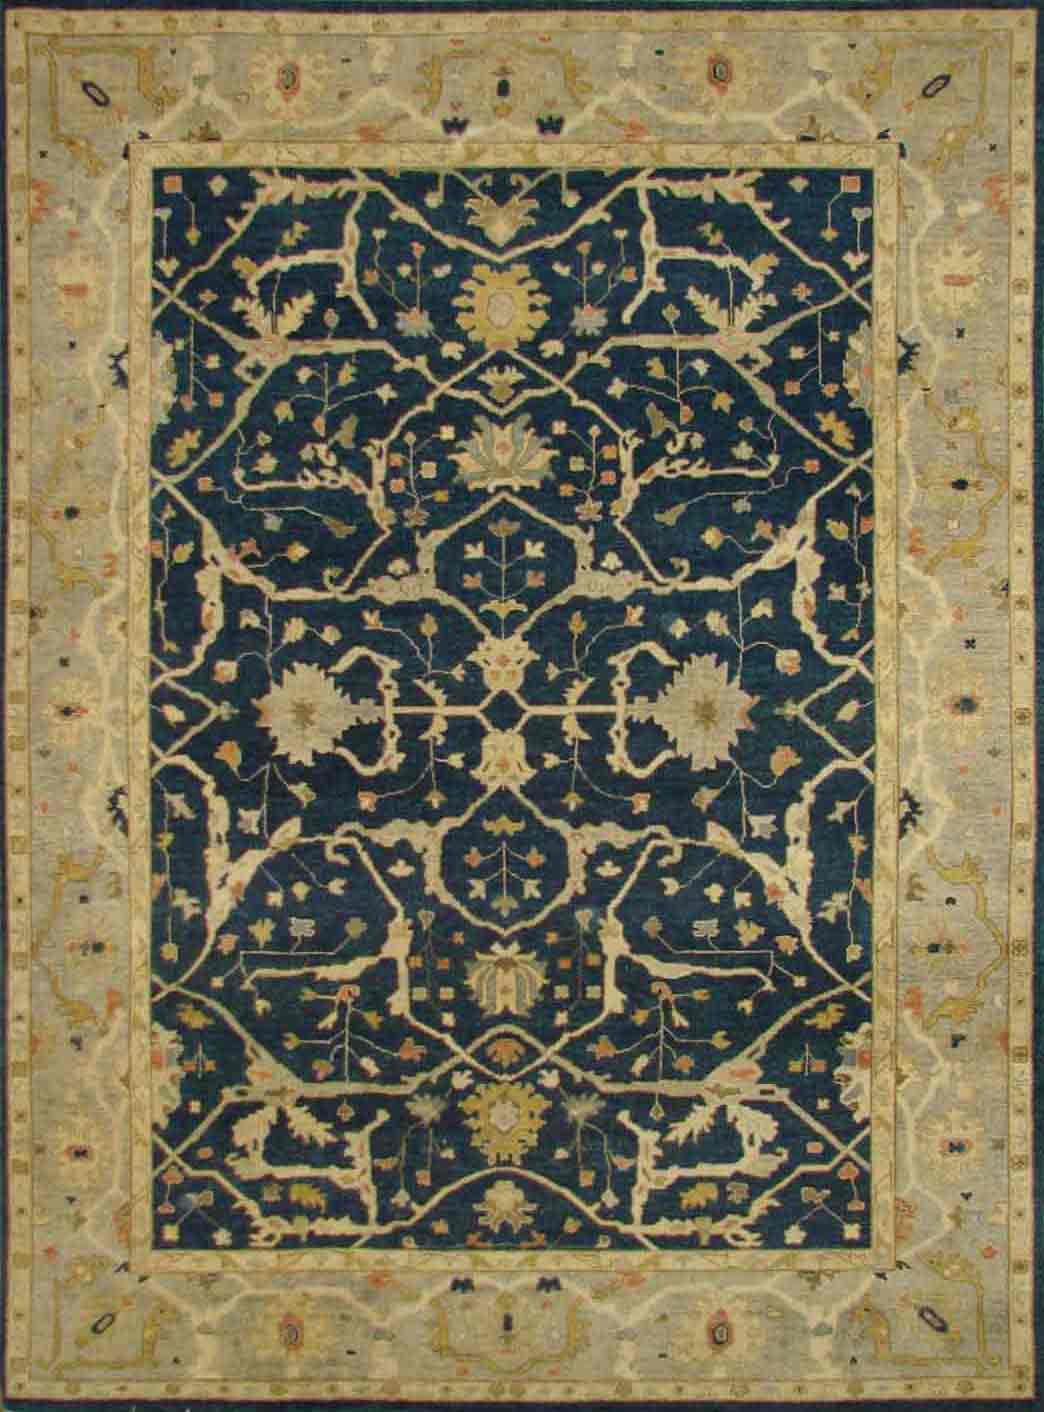 Buy P-KNOT ODR Exclusive Hand Knoted Oushak Rug at Oriental Designer Rugs